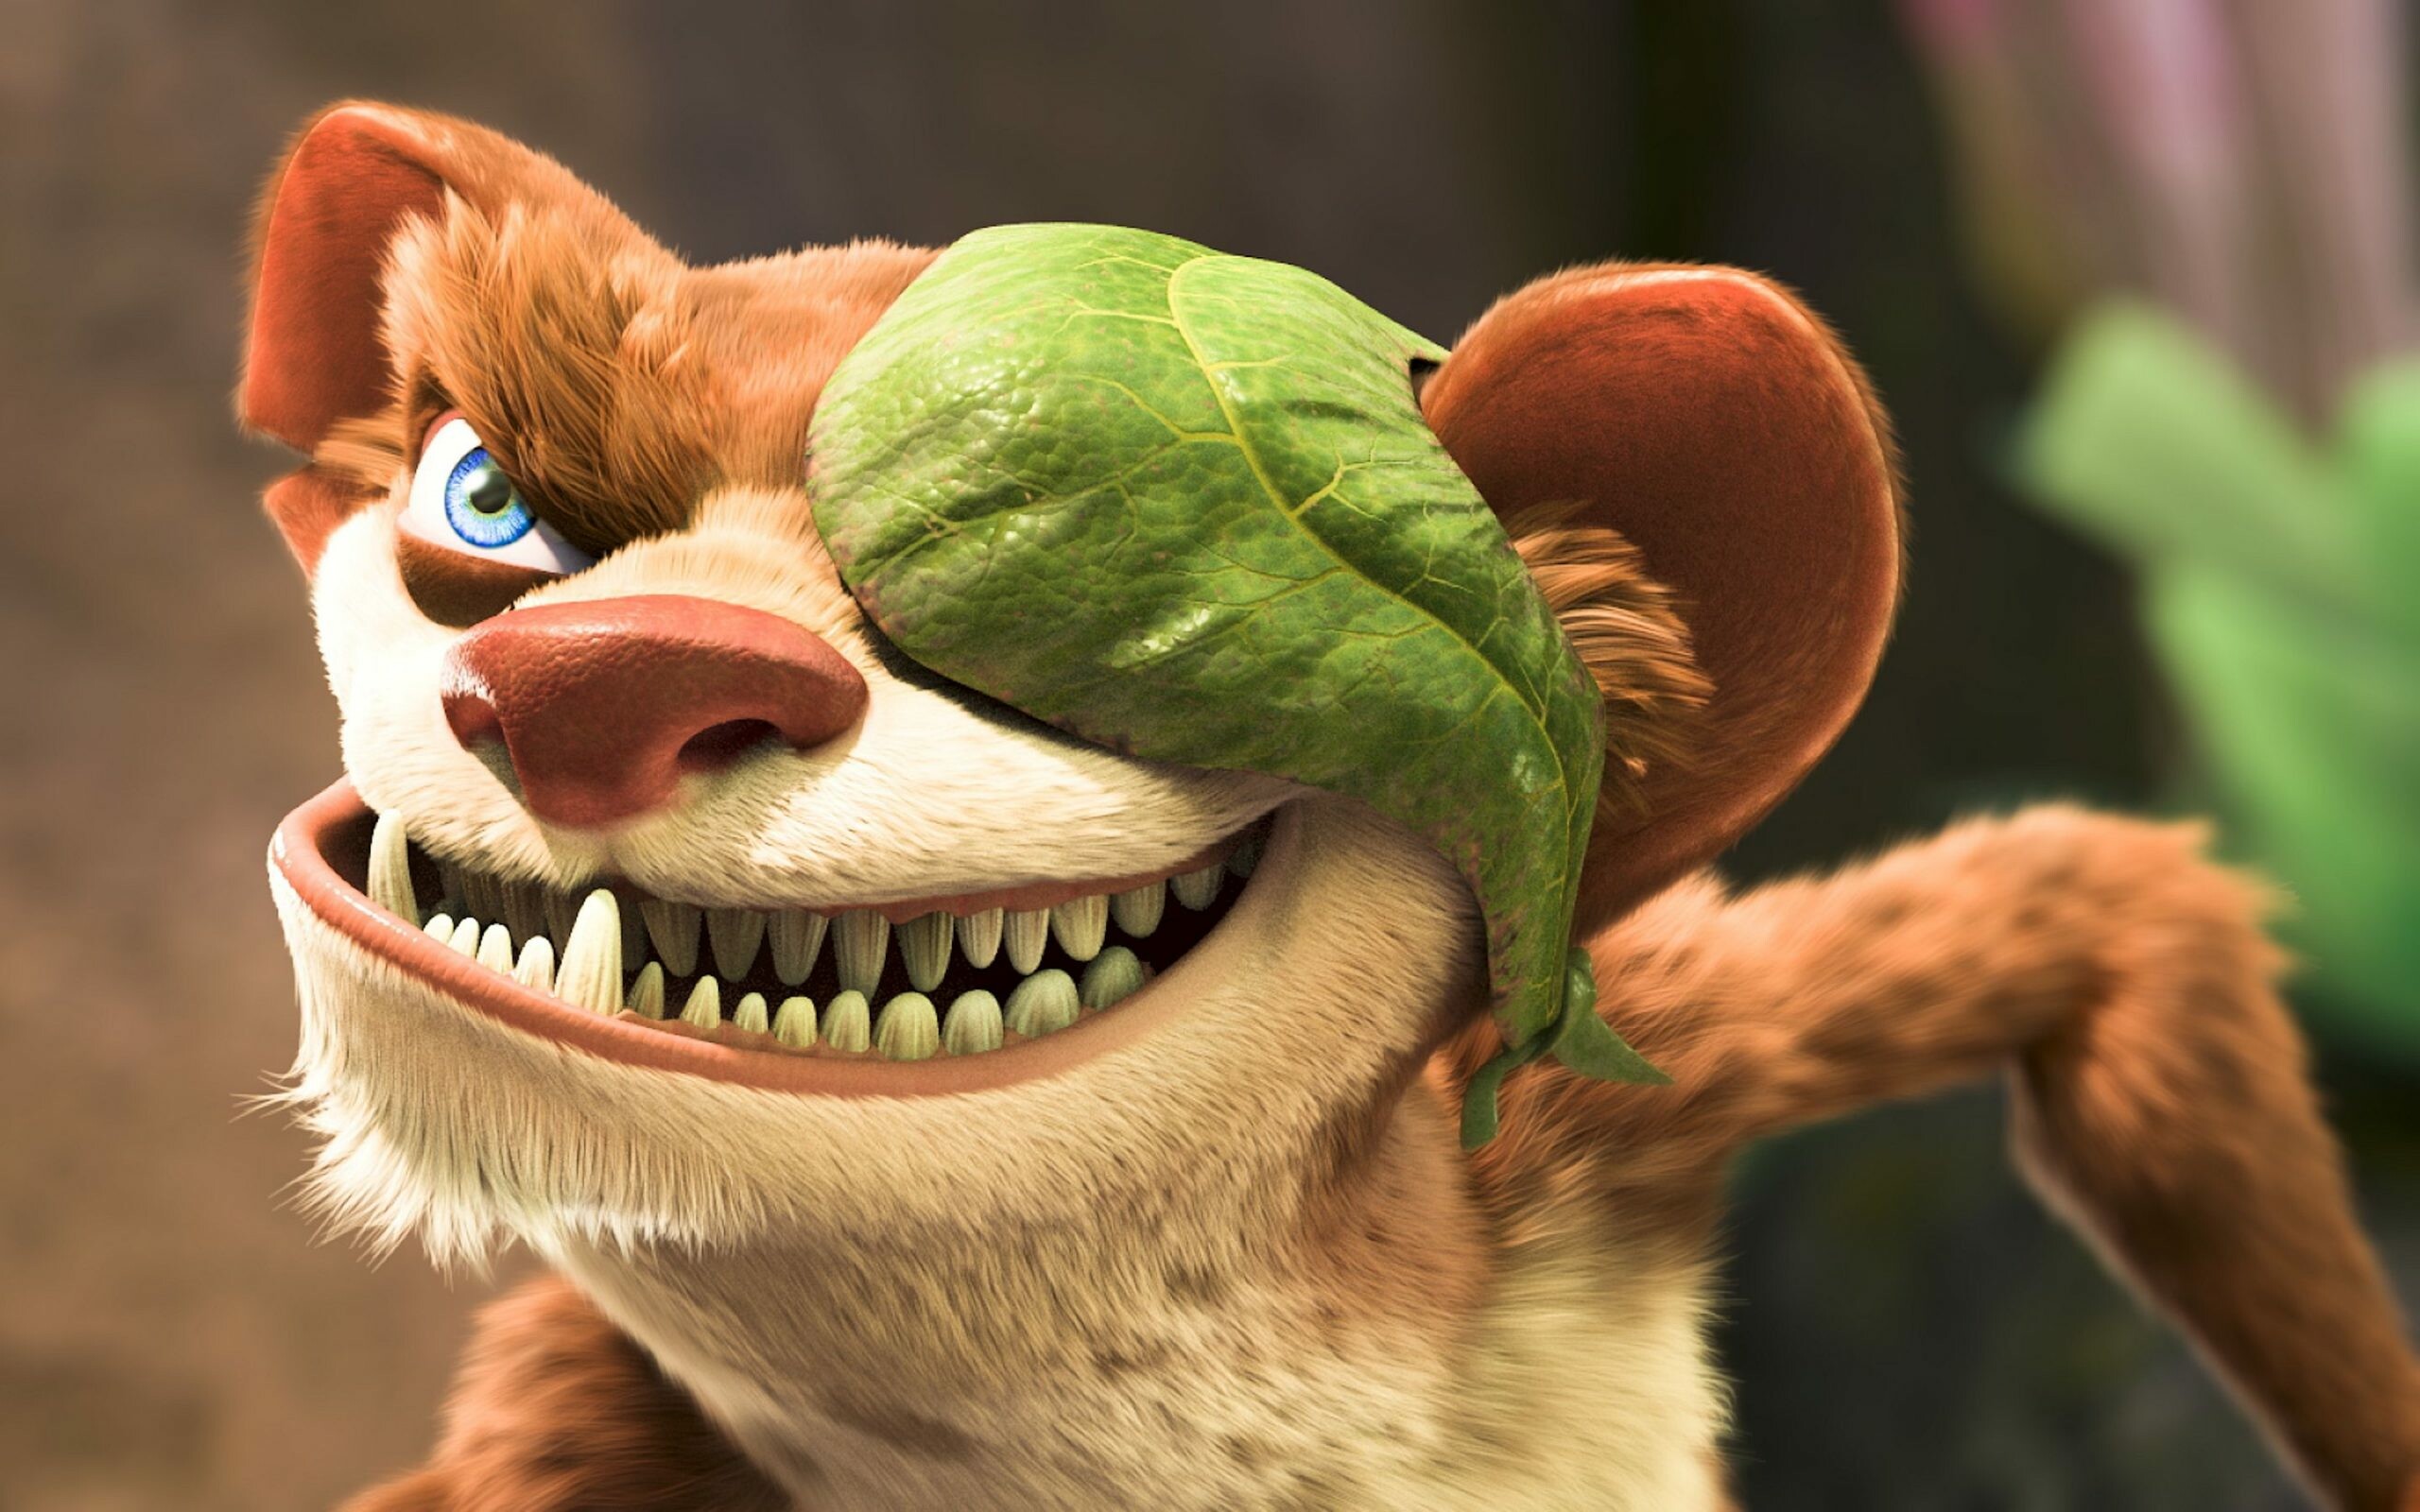 Ice Age: Adventures of Buck Wild: Buckminster "Buck" Wild, missing his right eye and wears a leaf as an impromptu eyepatch. 2560x1600 HD Wallpaper.